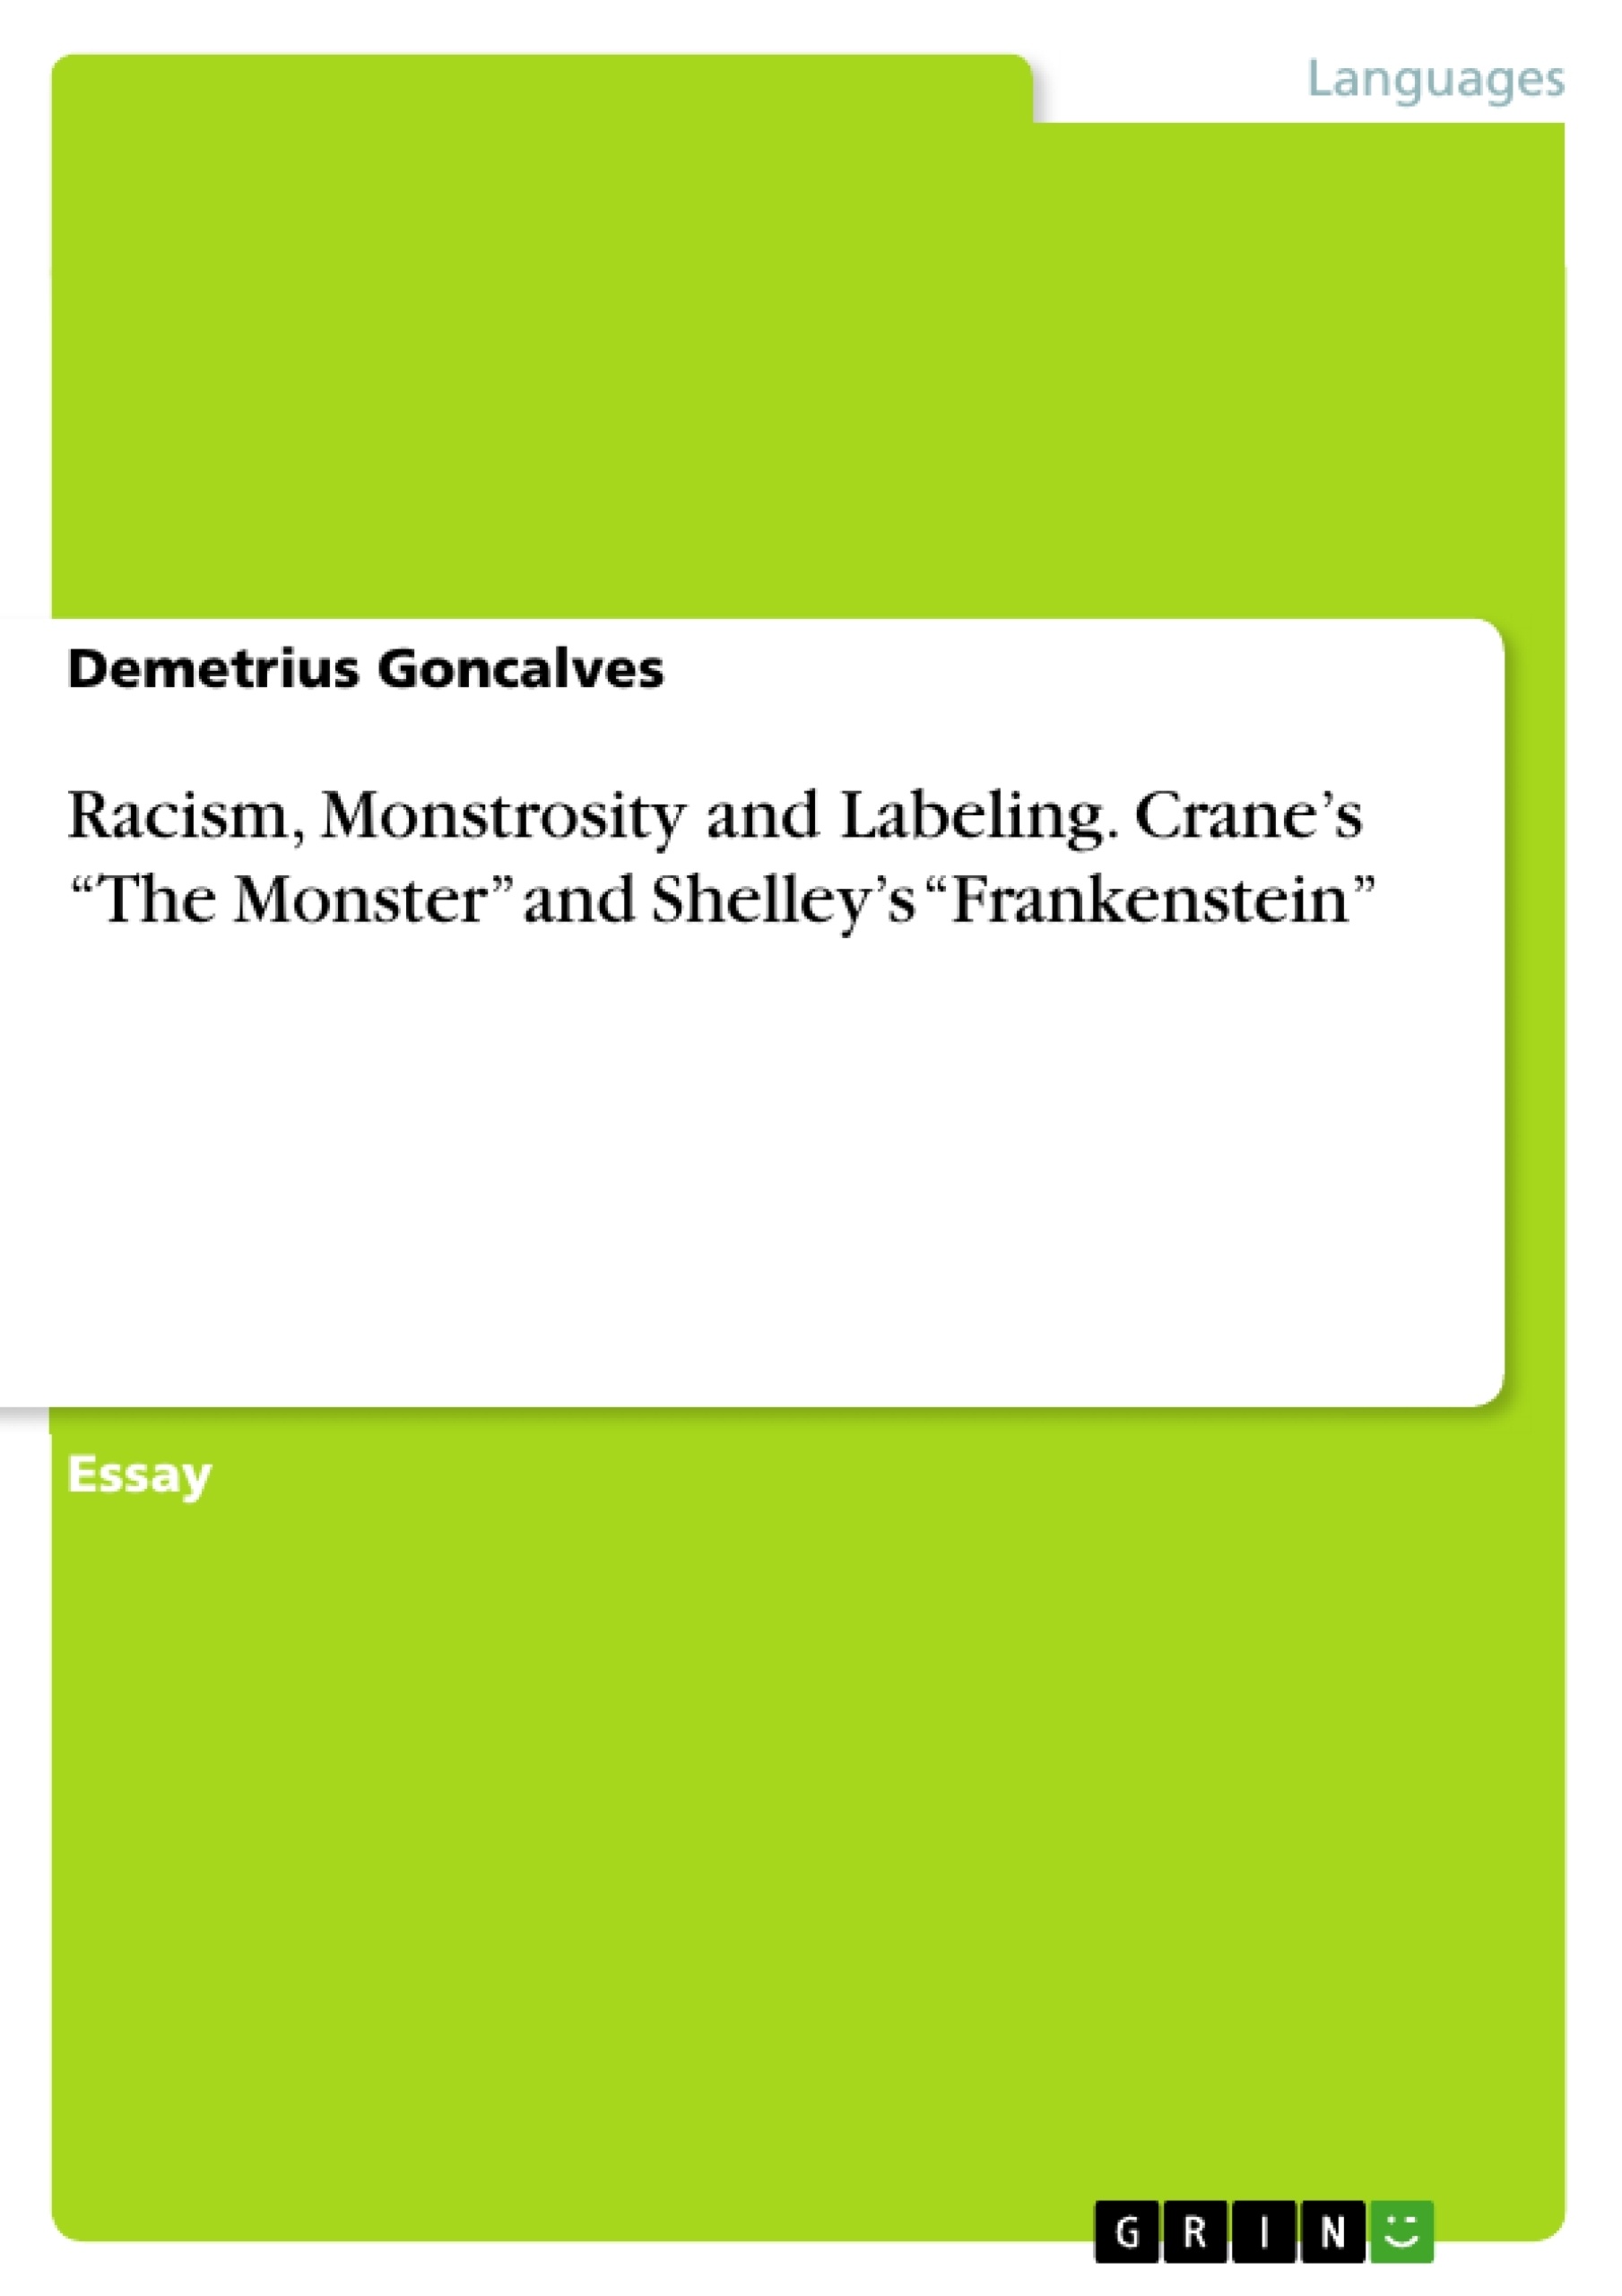 Title: Racism, Monstrosity and Labeling. Crane’s “The Monster” and Shelley’s “Frankenstein”